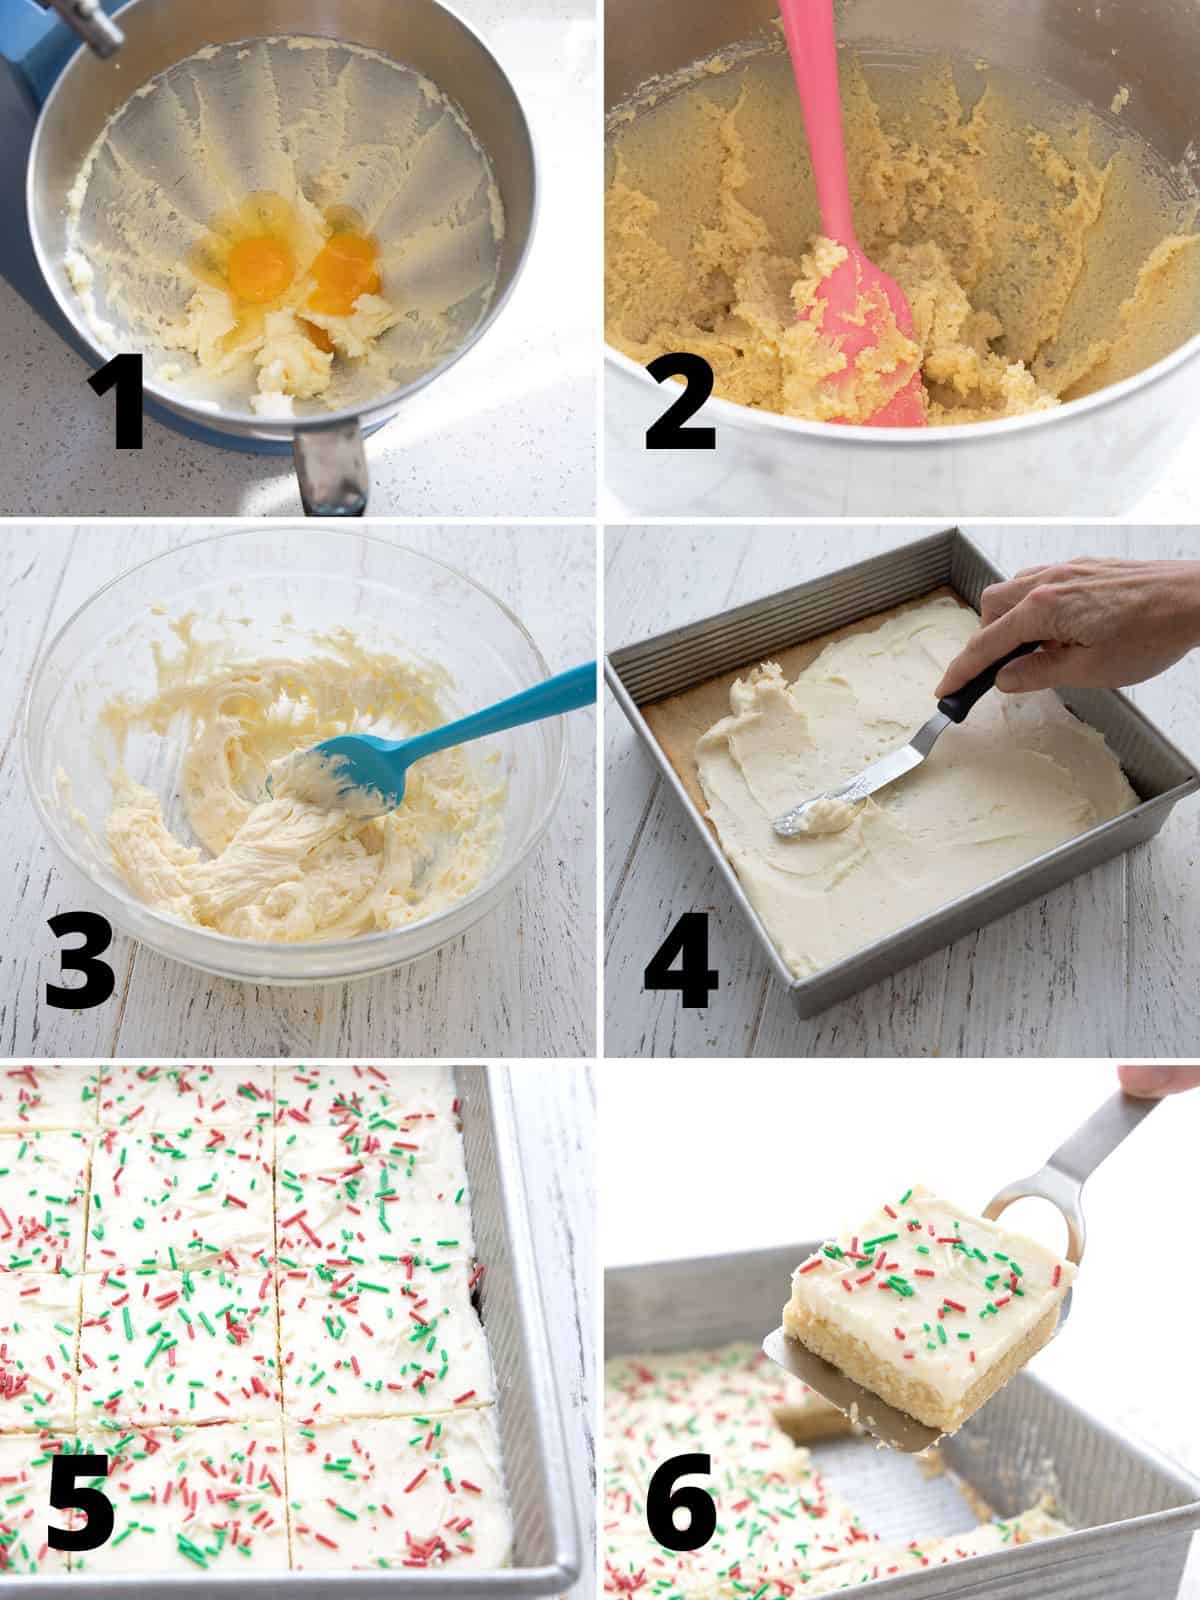 A collage of 6 images showing the steps for making Keto Sugar Cookie Bars.